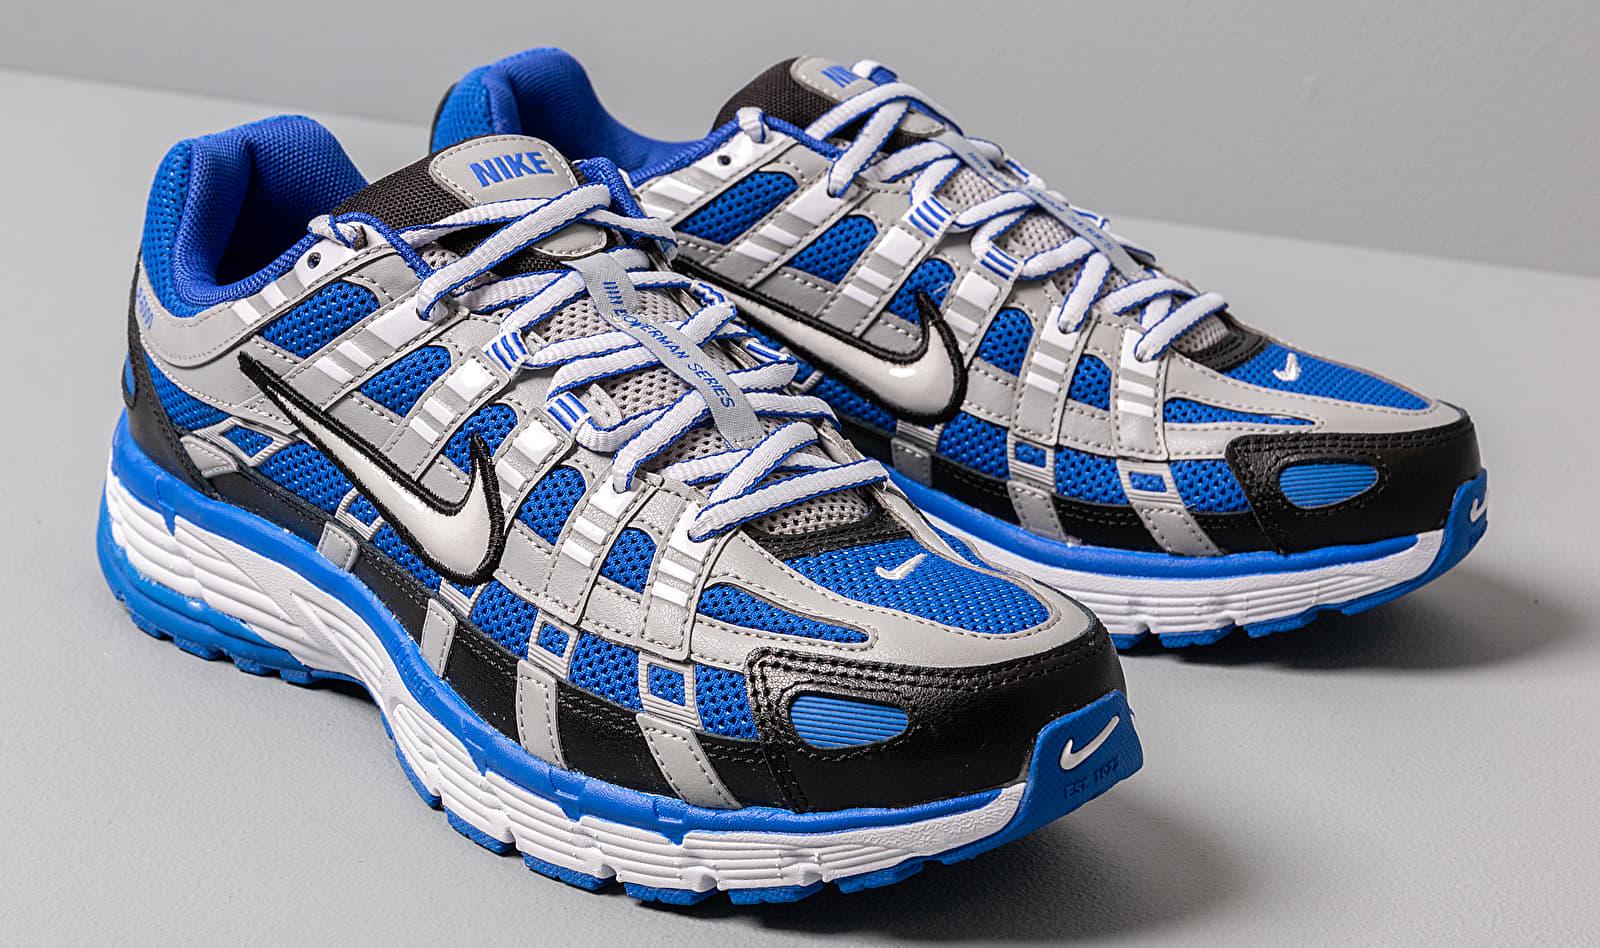 Nike Leather P-6000 in Blue/Black (Blue) for Men - Lyst